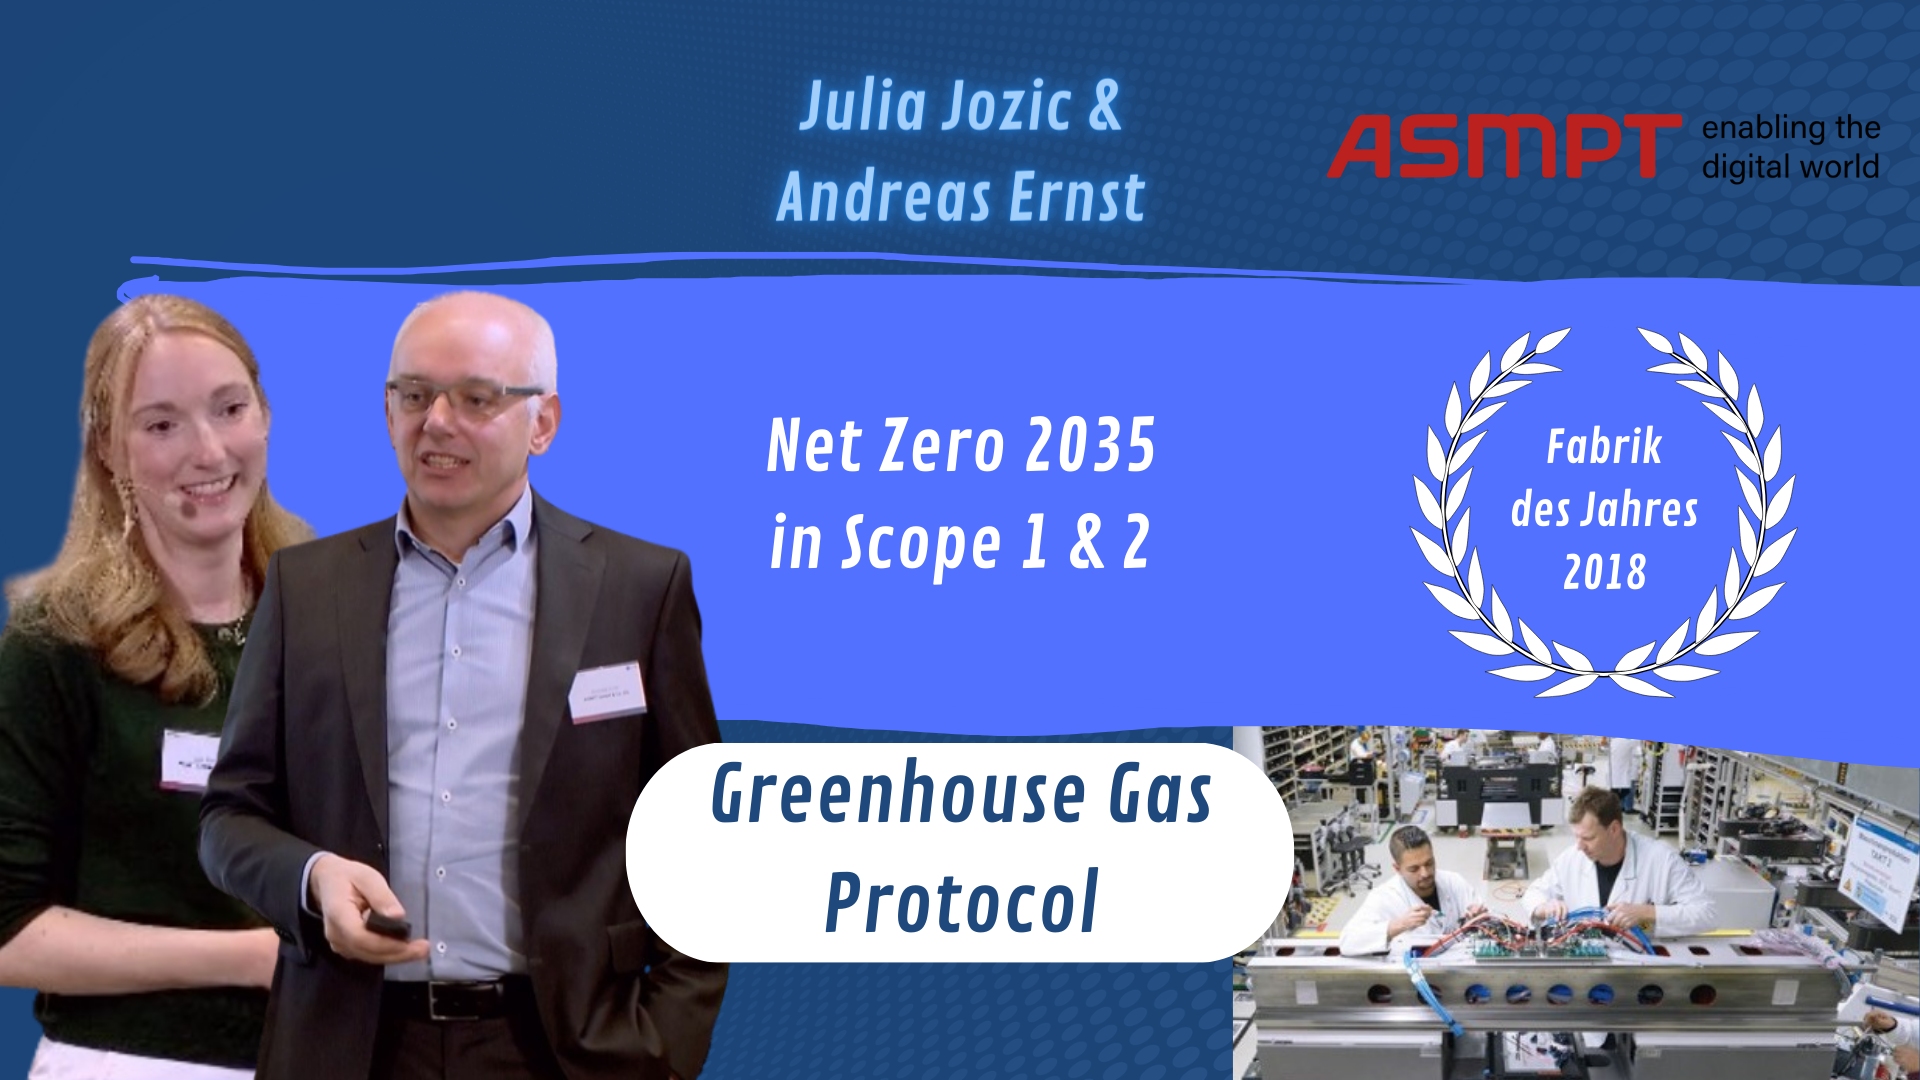 GREEN - Greenhouse Gas Protocol with Julia Jozic & Andreas Ernst